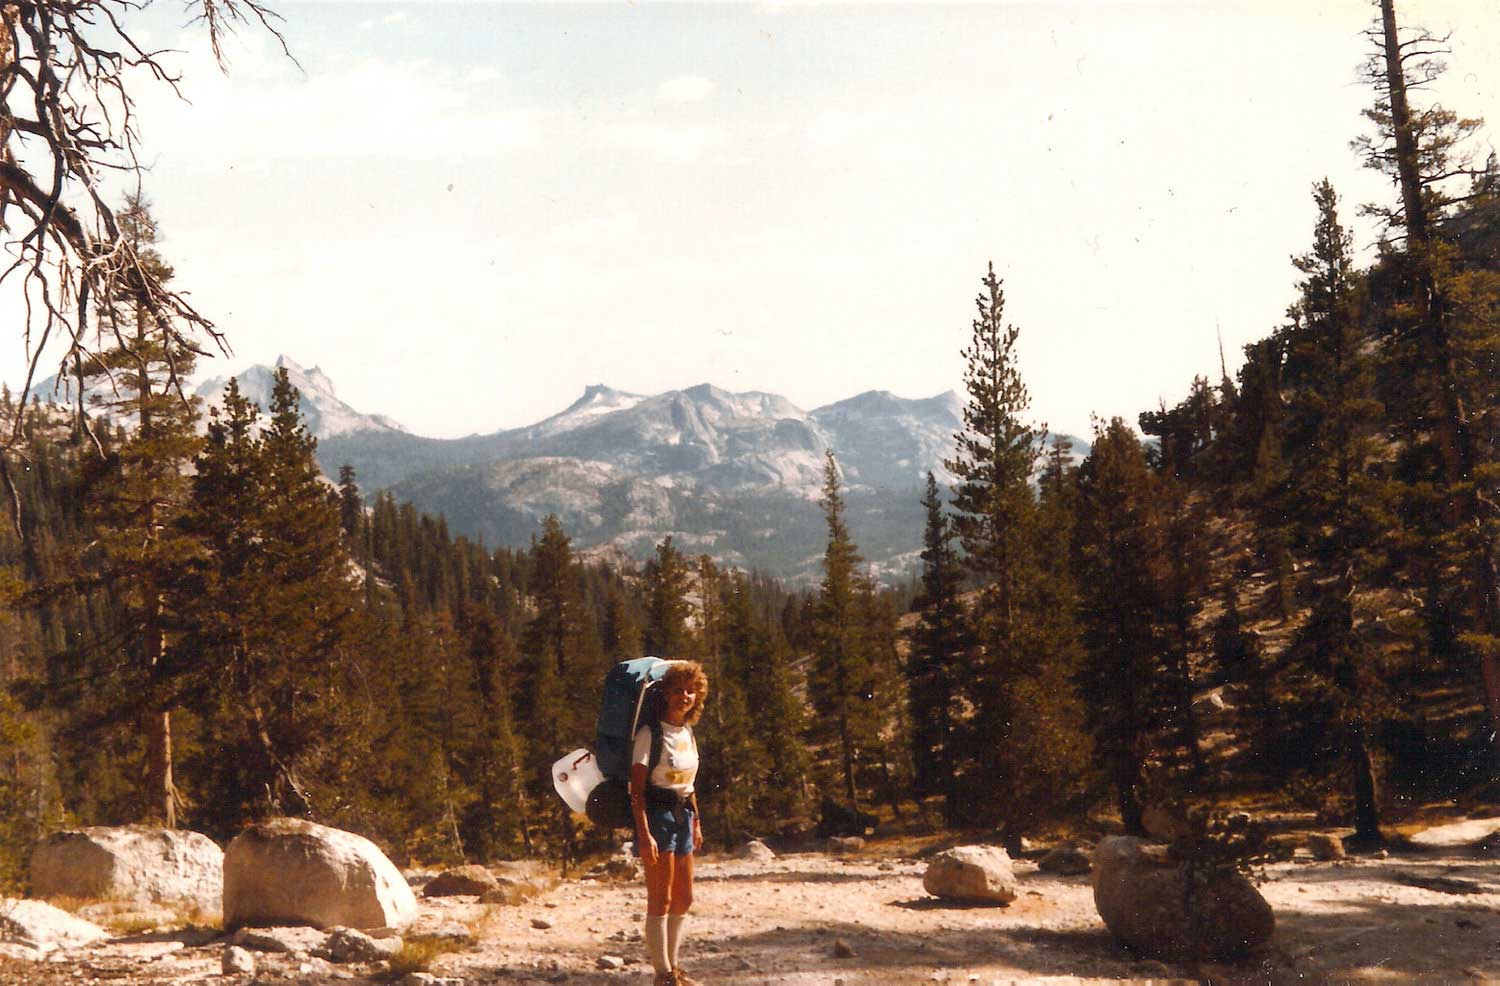 Madeleine's mother backpacking